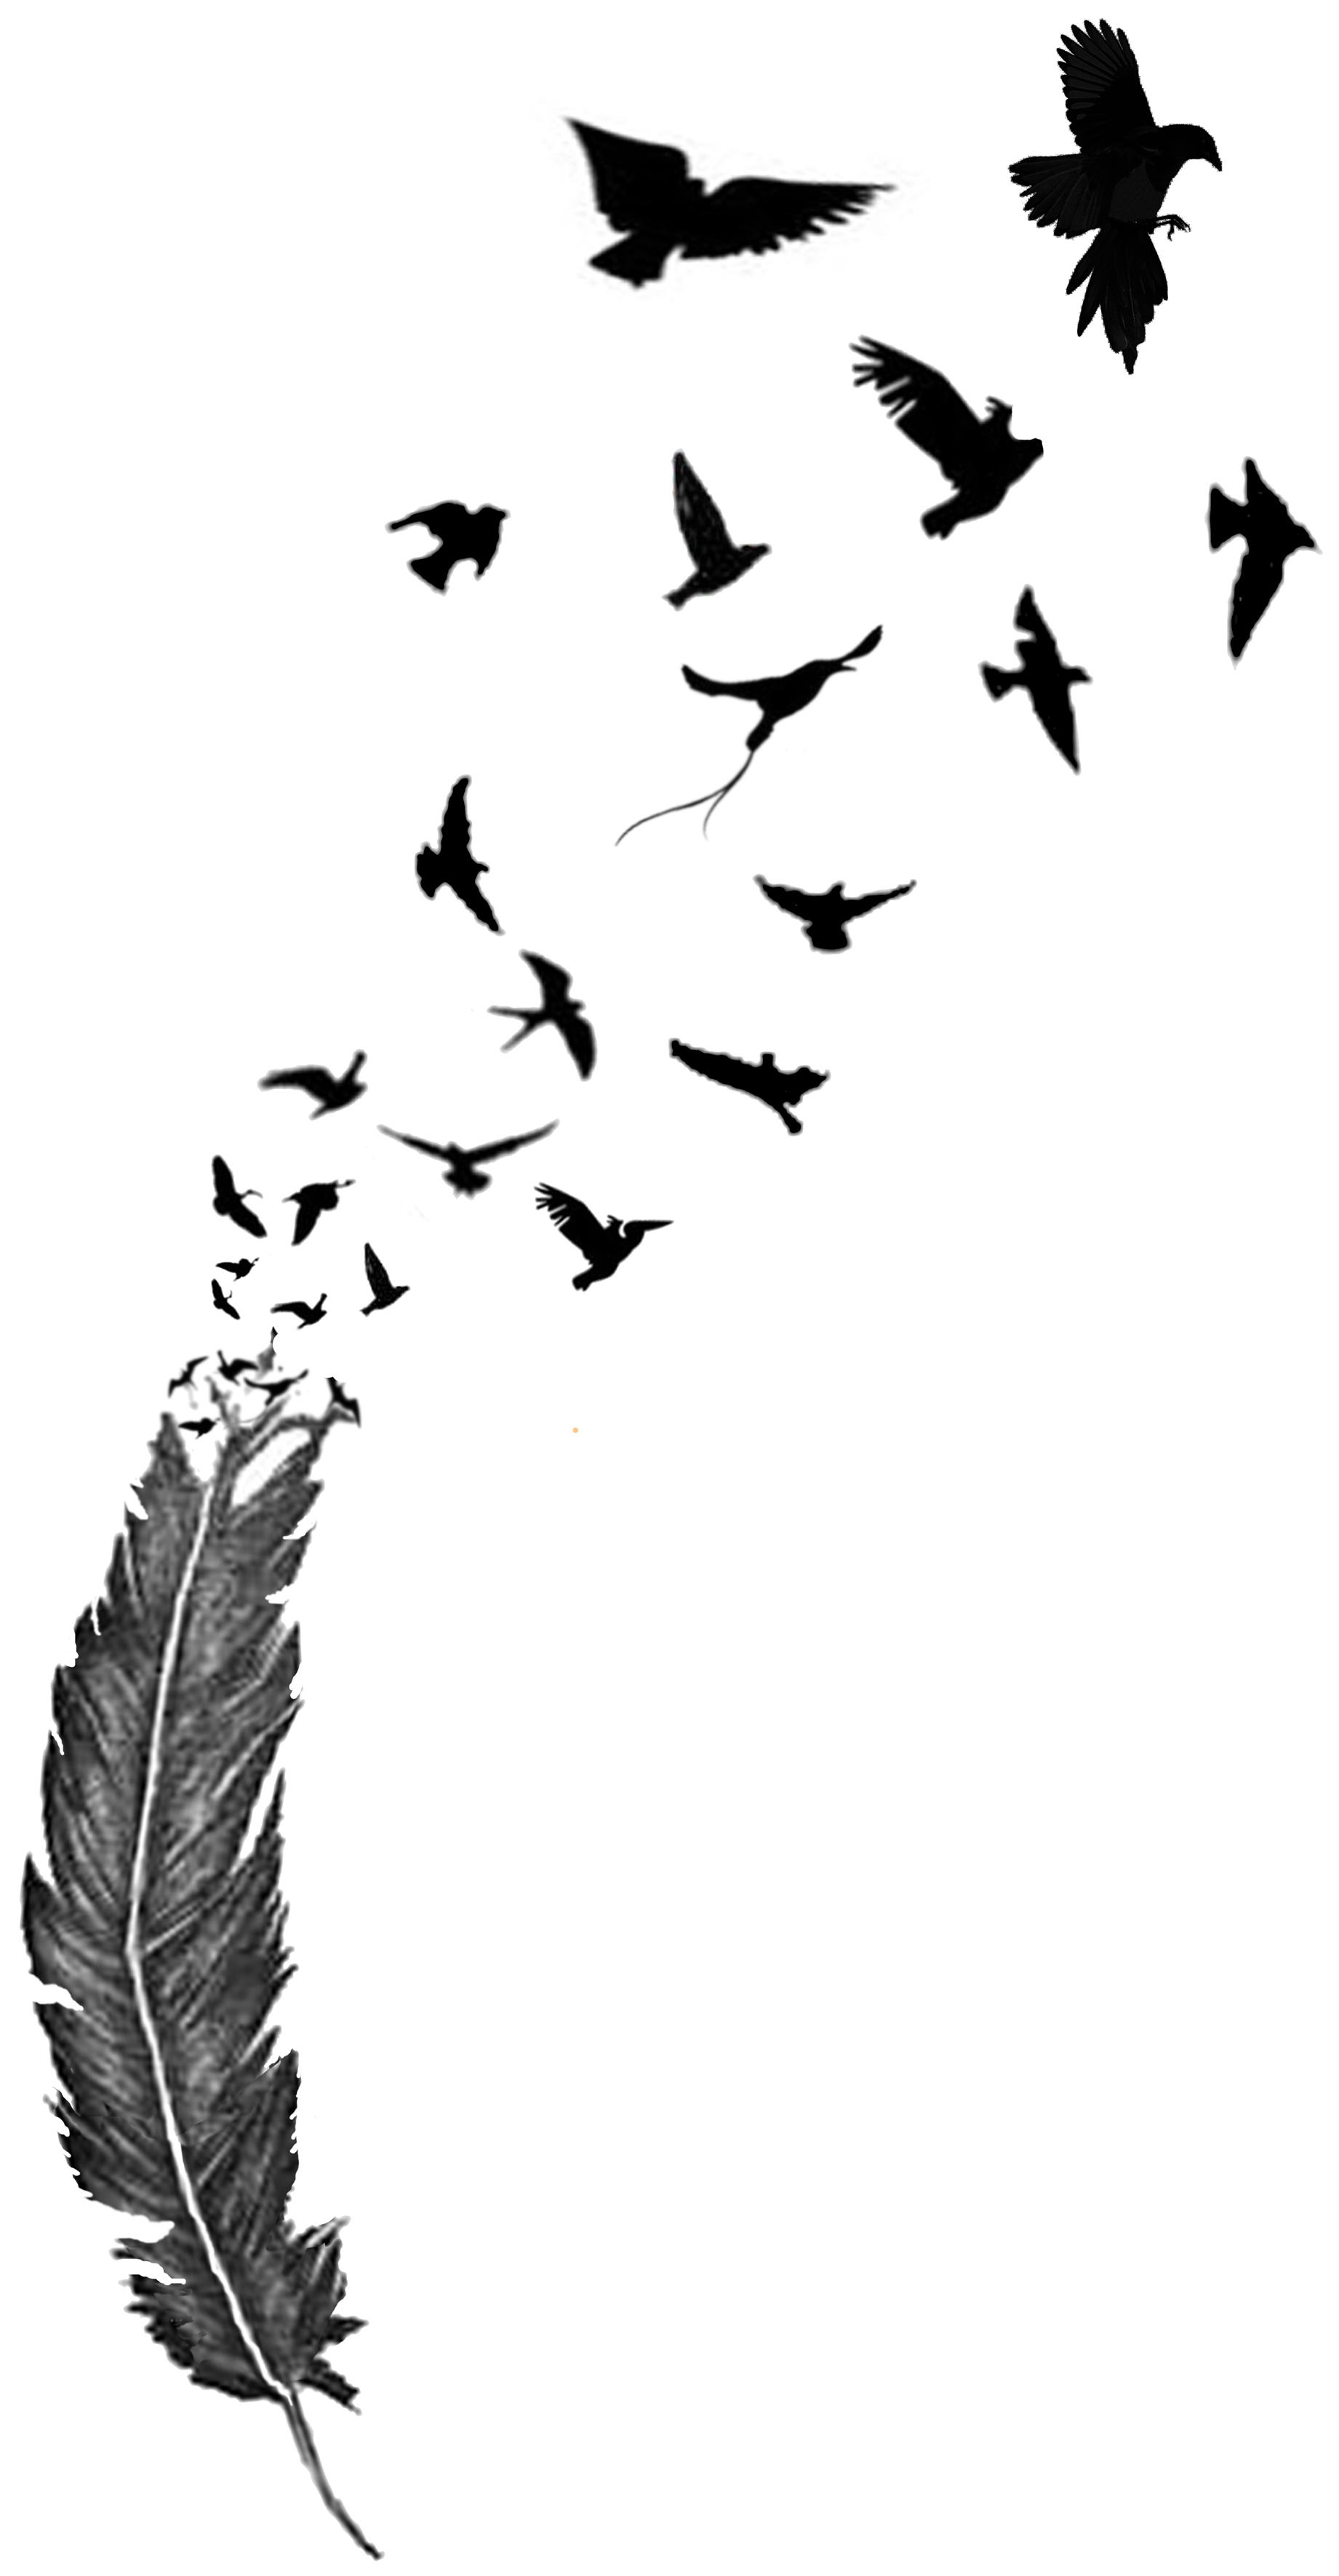 Flock of birds flying out Feather, drawing free image download